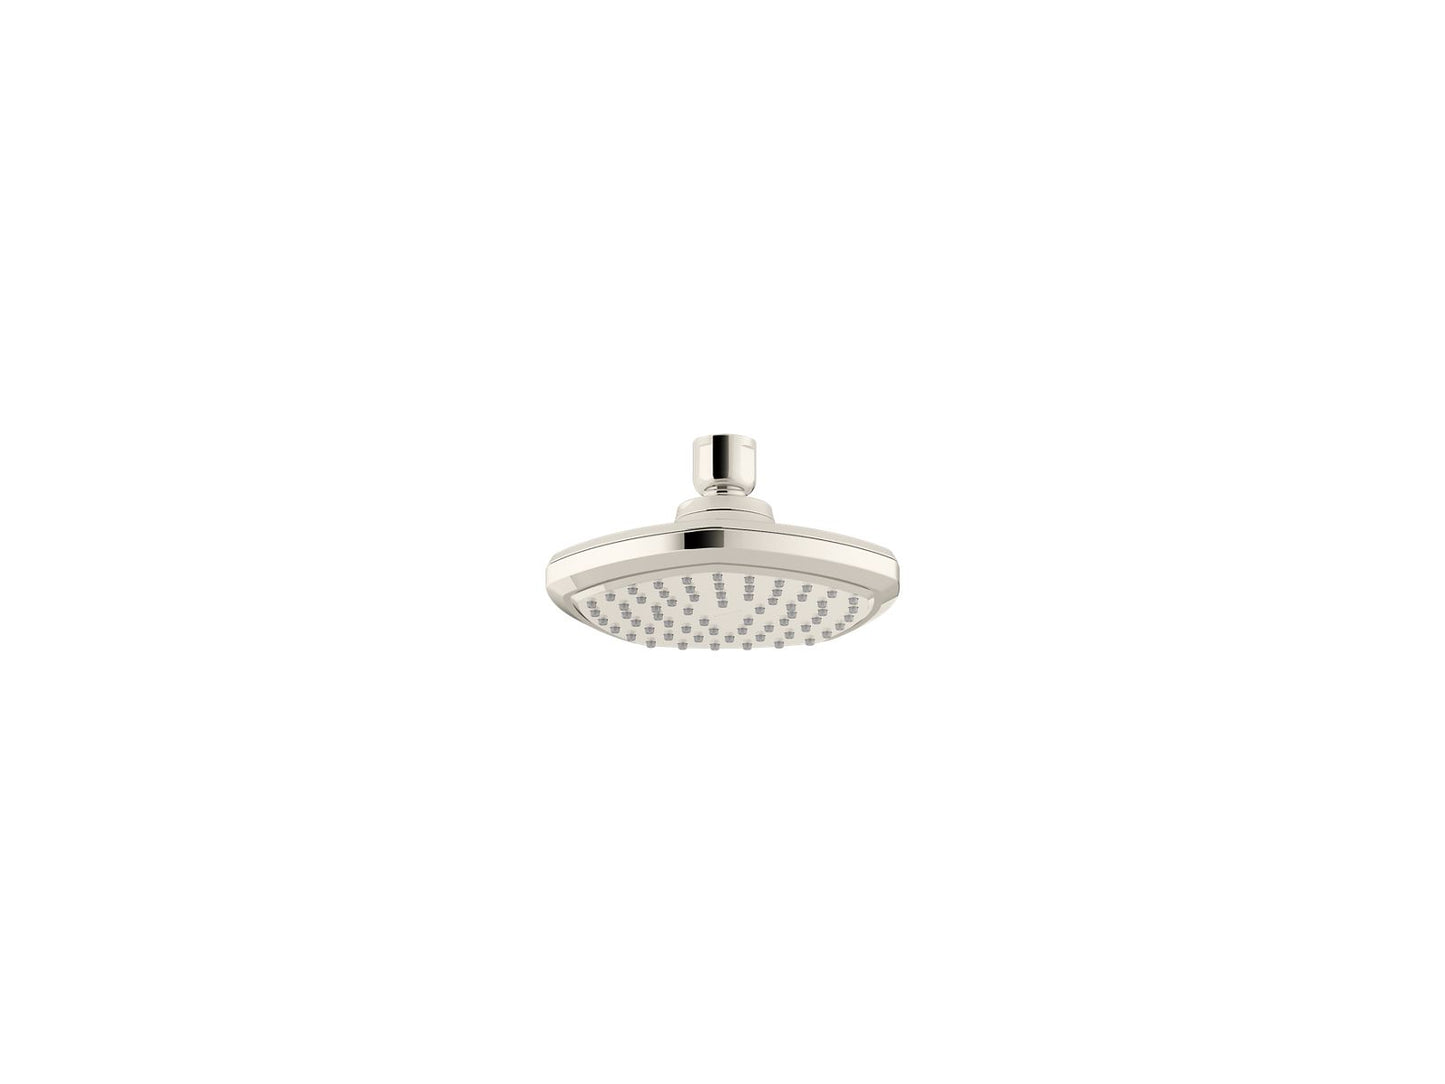 KOHLER K-27050-G-SN Occasion Single-Function Showerhead, 1.75 Gpm In Vibrant Polished Nickel